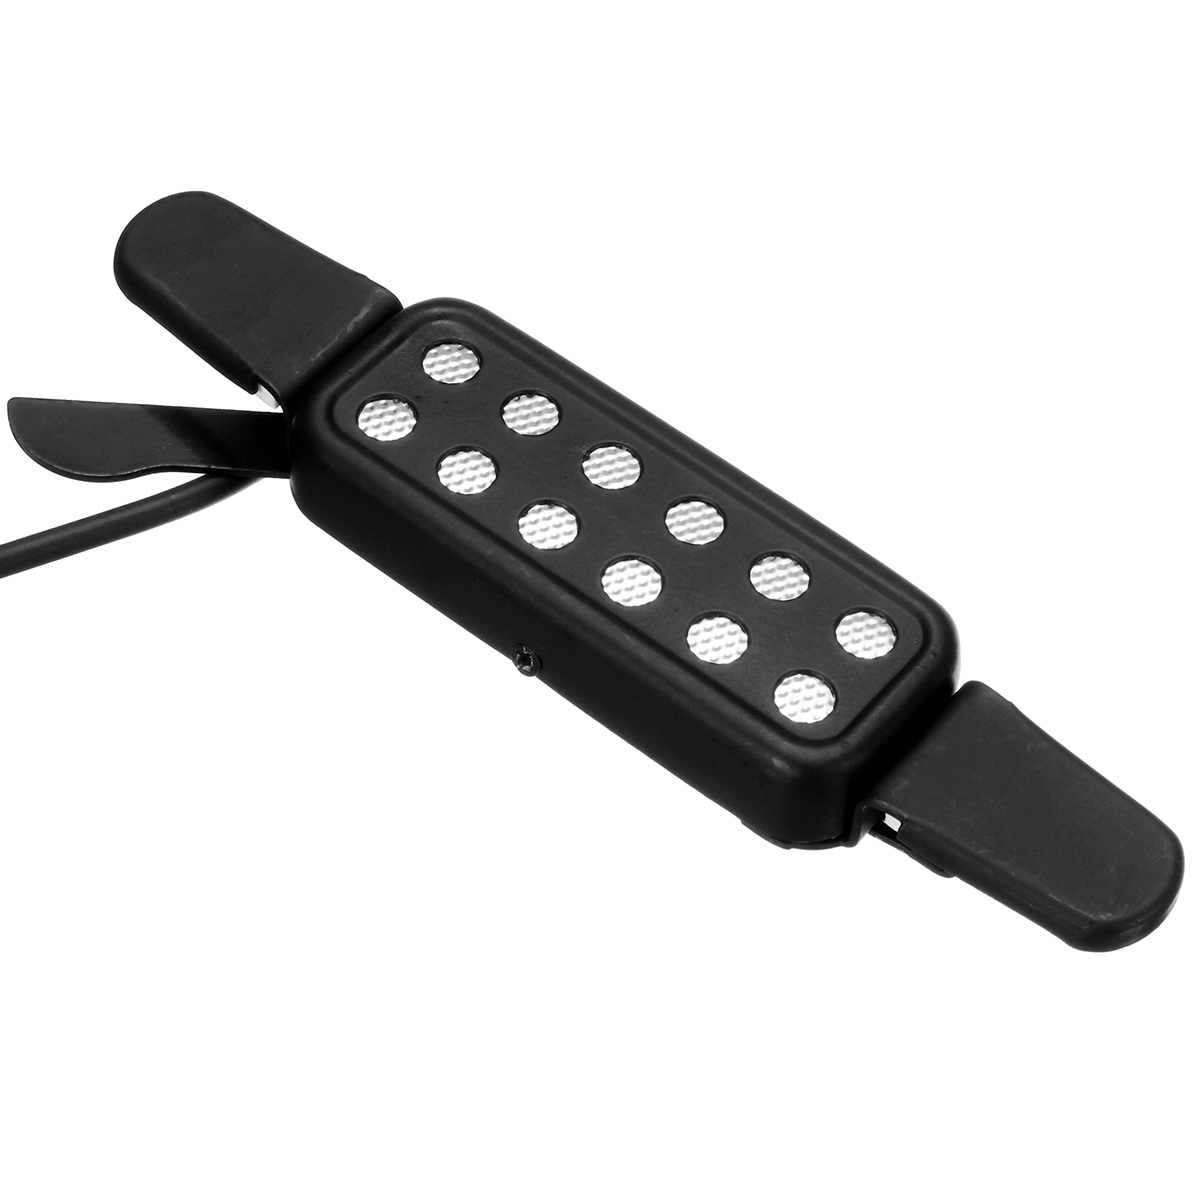 12-Hole-Sound-Pickup-Microphone-Amplifier-Speaker-for-Acoustic-Guitar-1340713